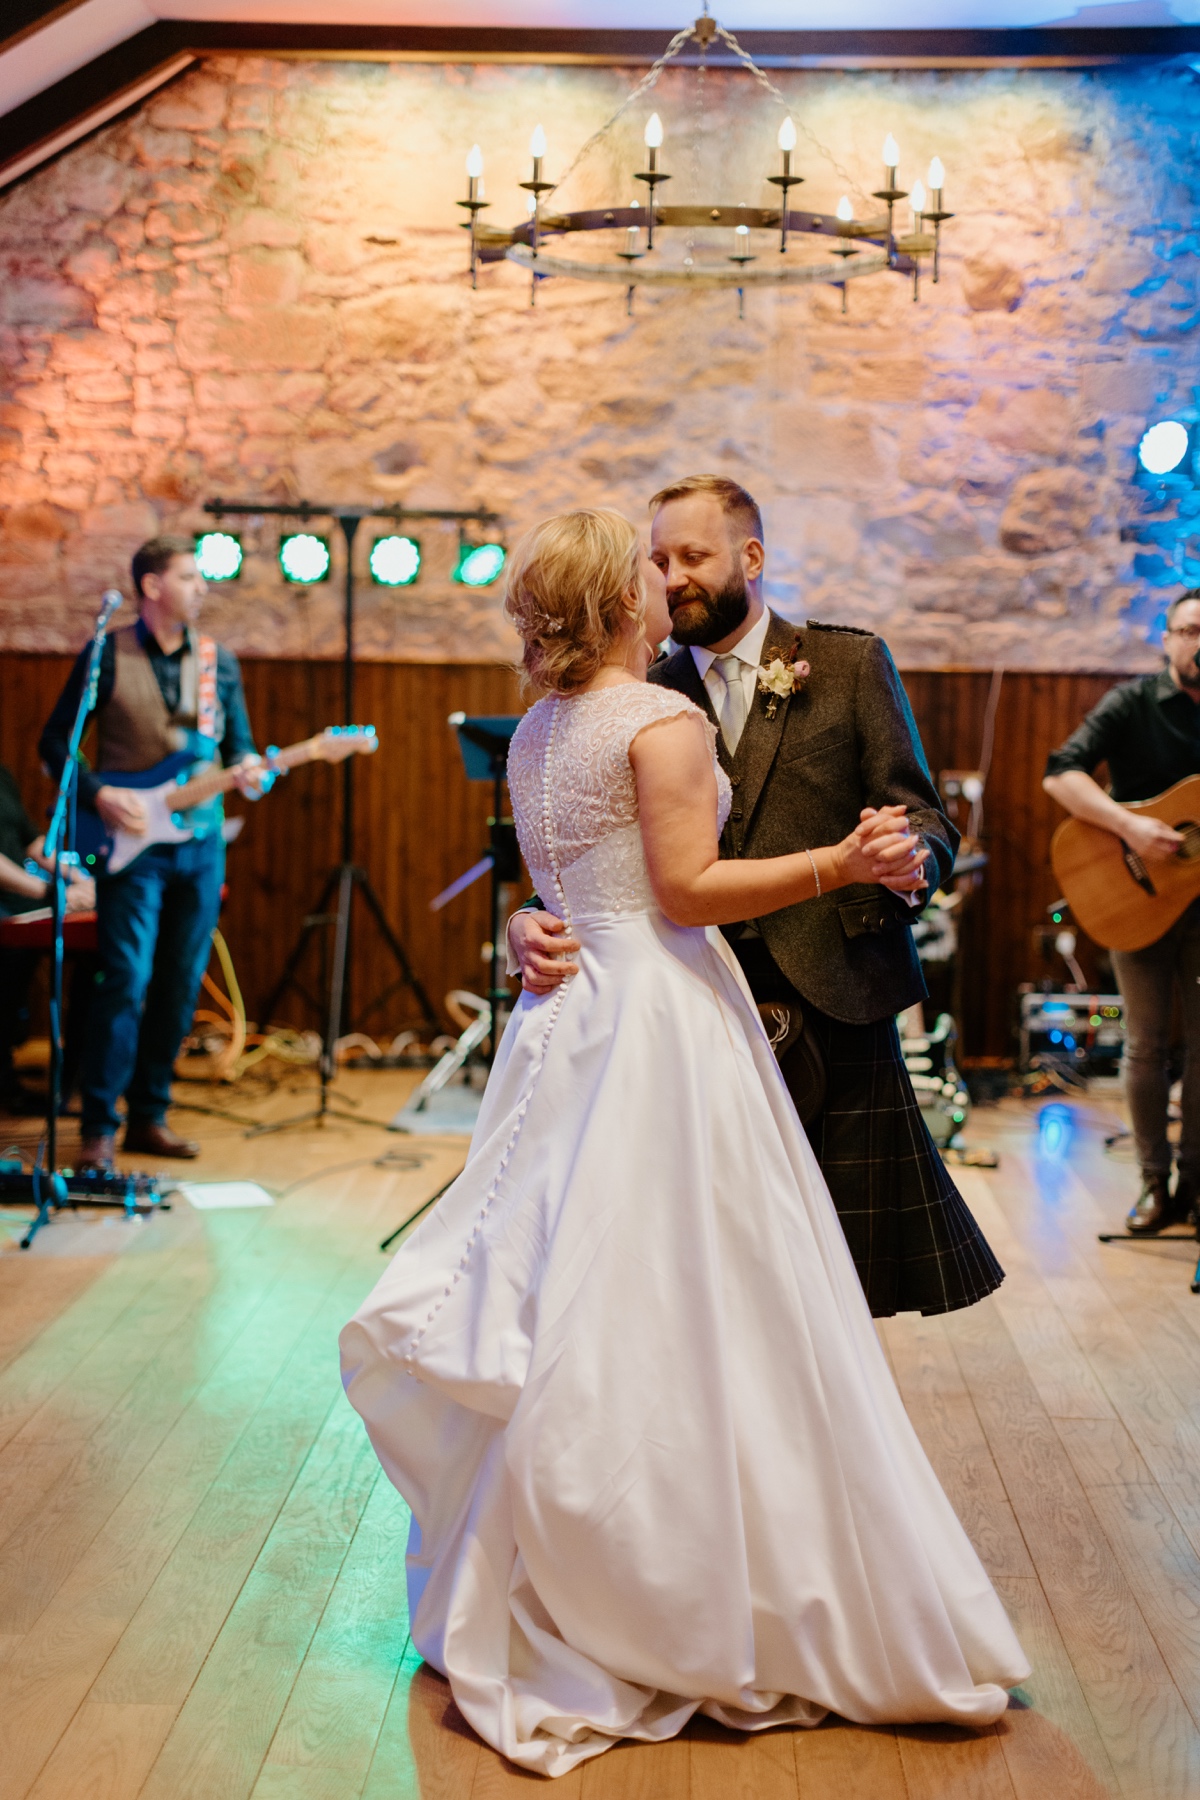 bride wearing white dress and groom wearing kilt outfit first dance with band in background scottish humanist wedding